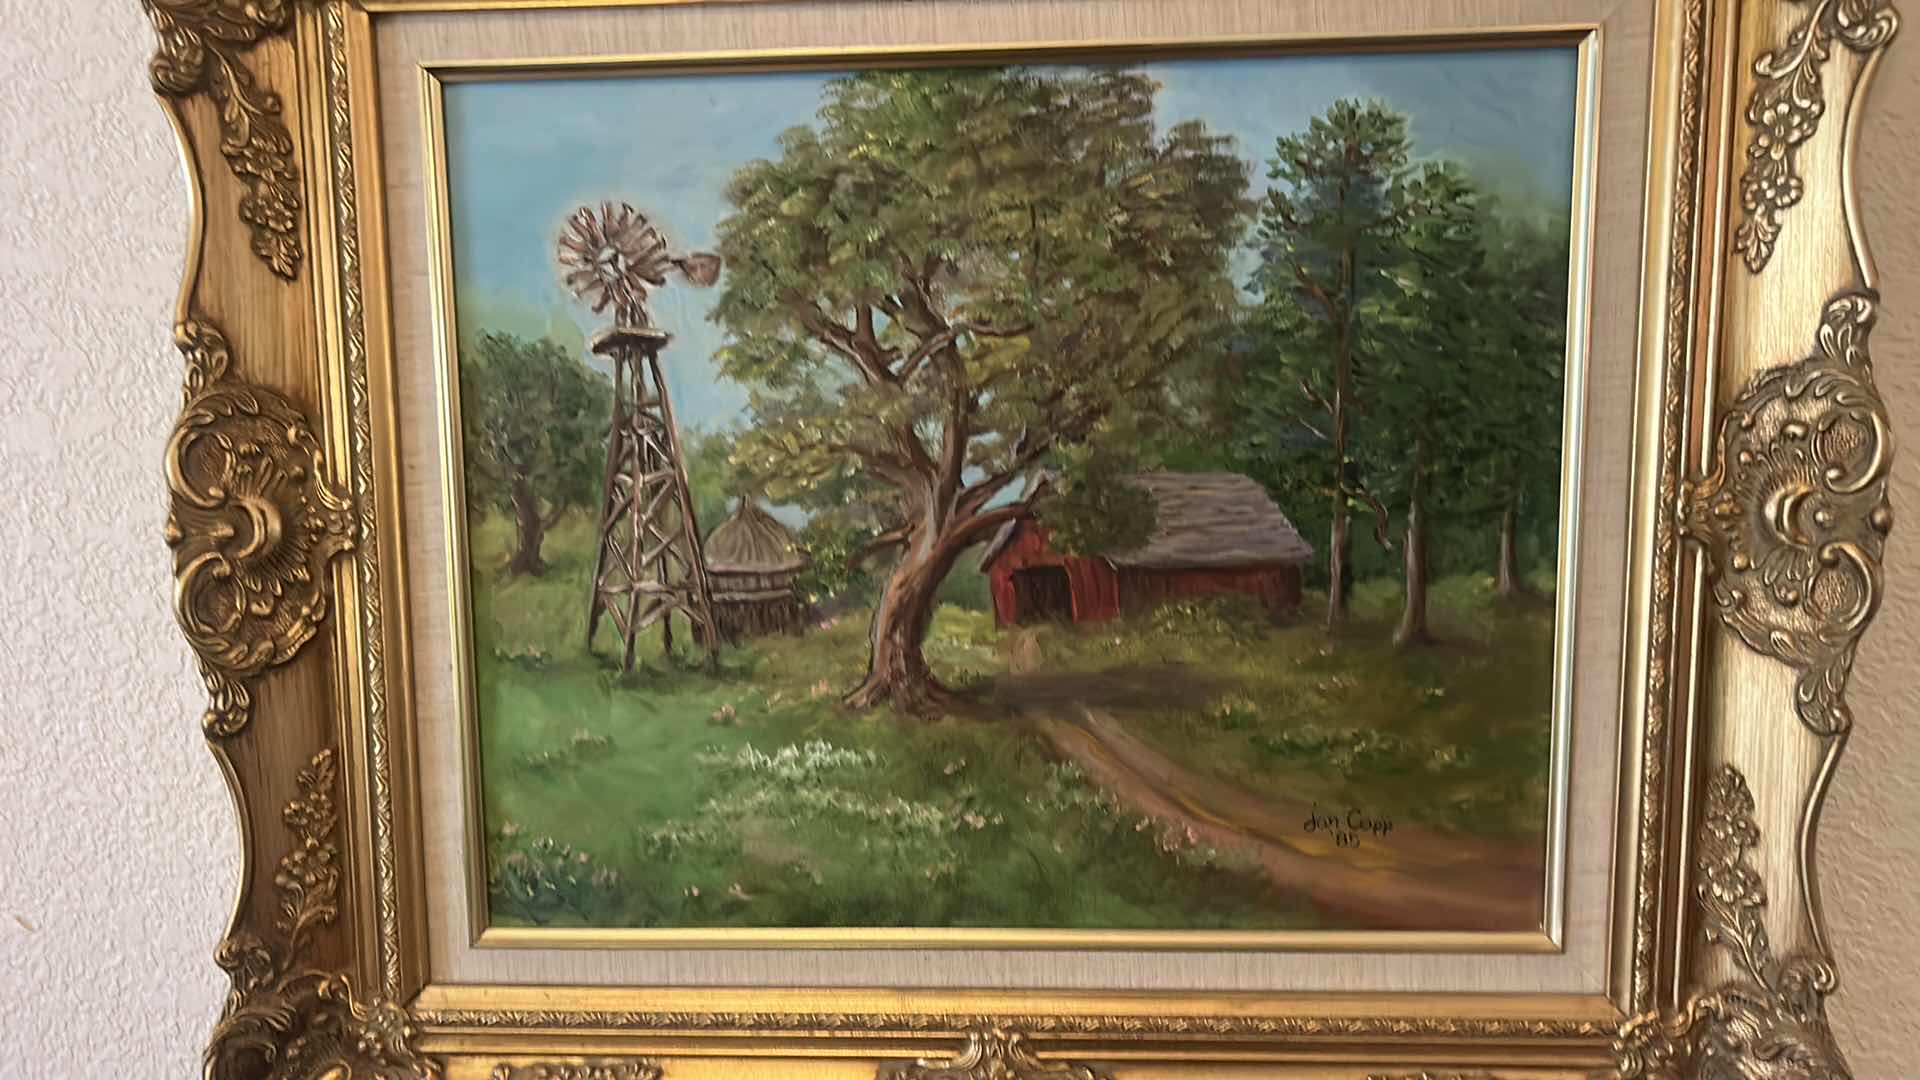 Photo 6 of SIGNED OIL ON CANVAS “RED BARN AND WINDMILL ORNATE GOLD FRAMED 28 1/2” x 25